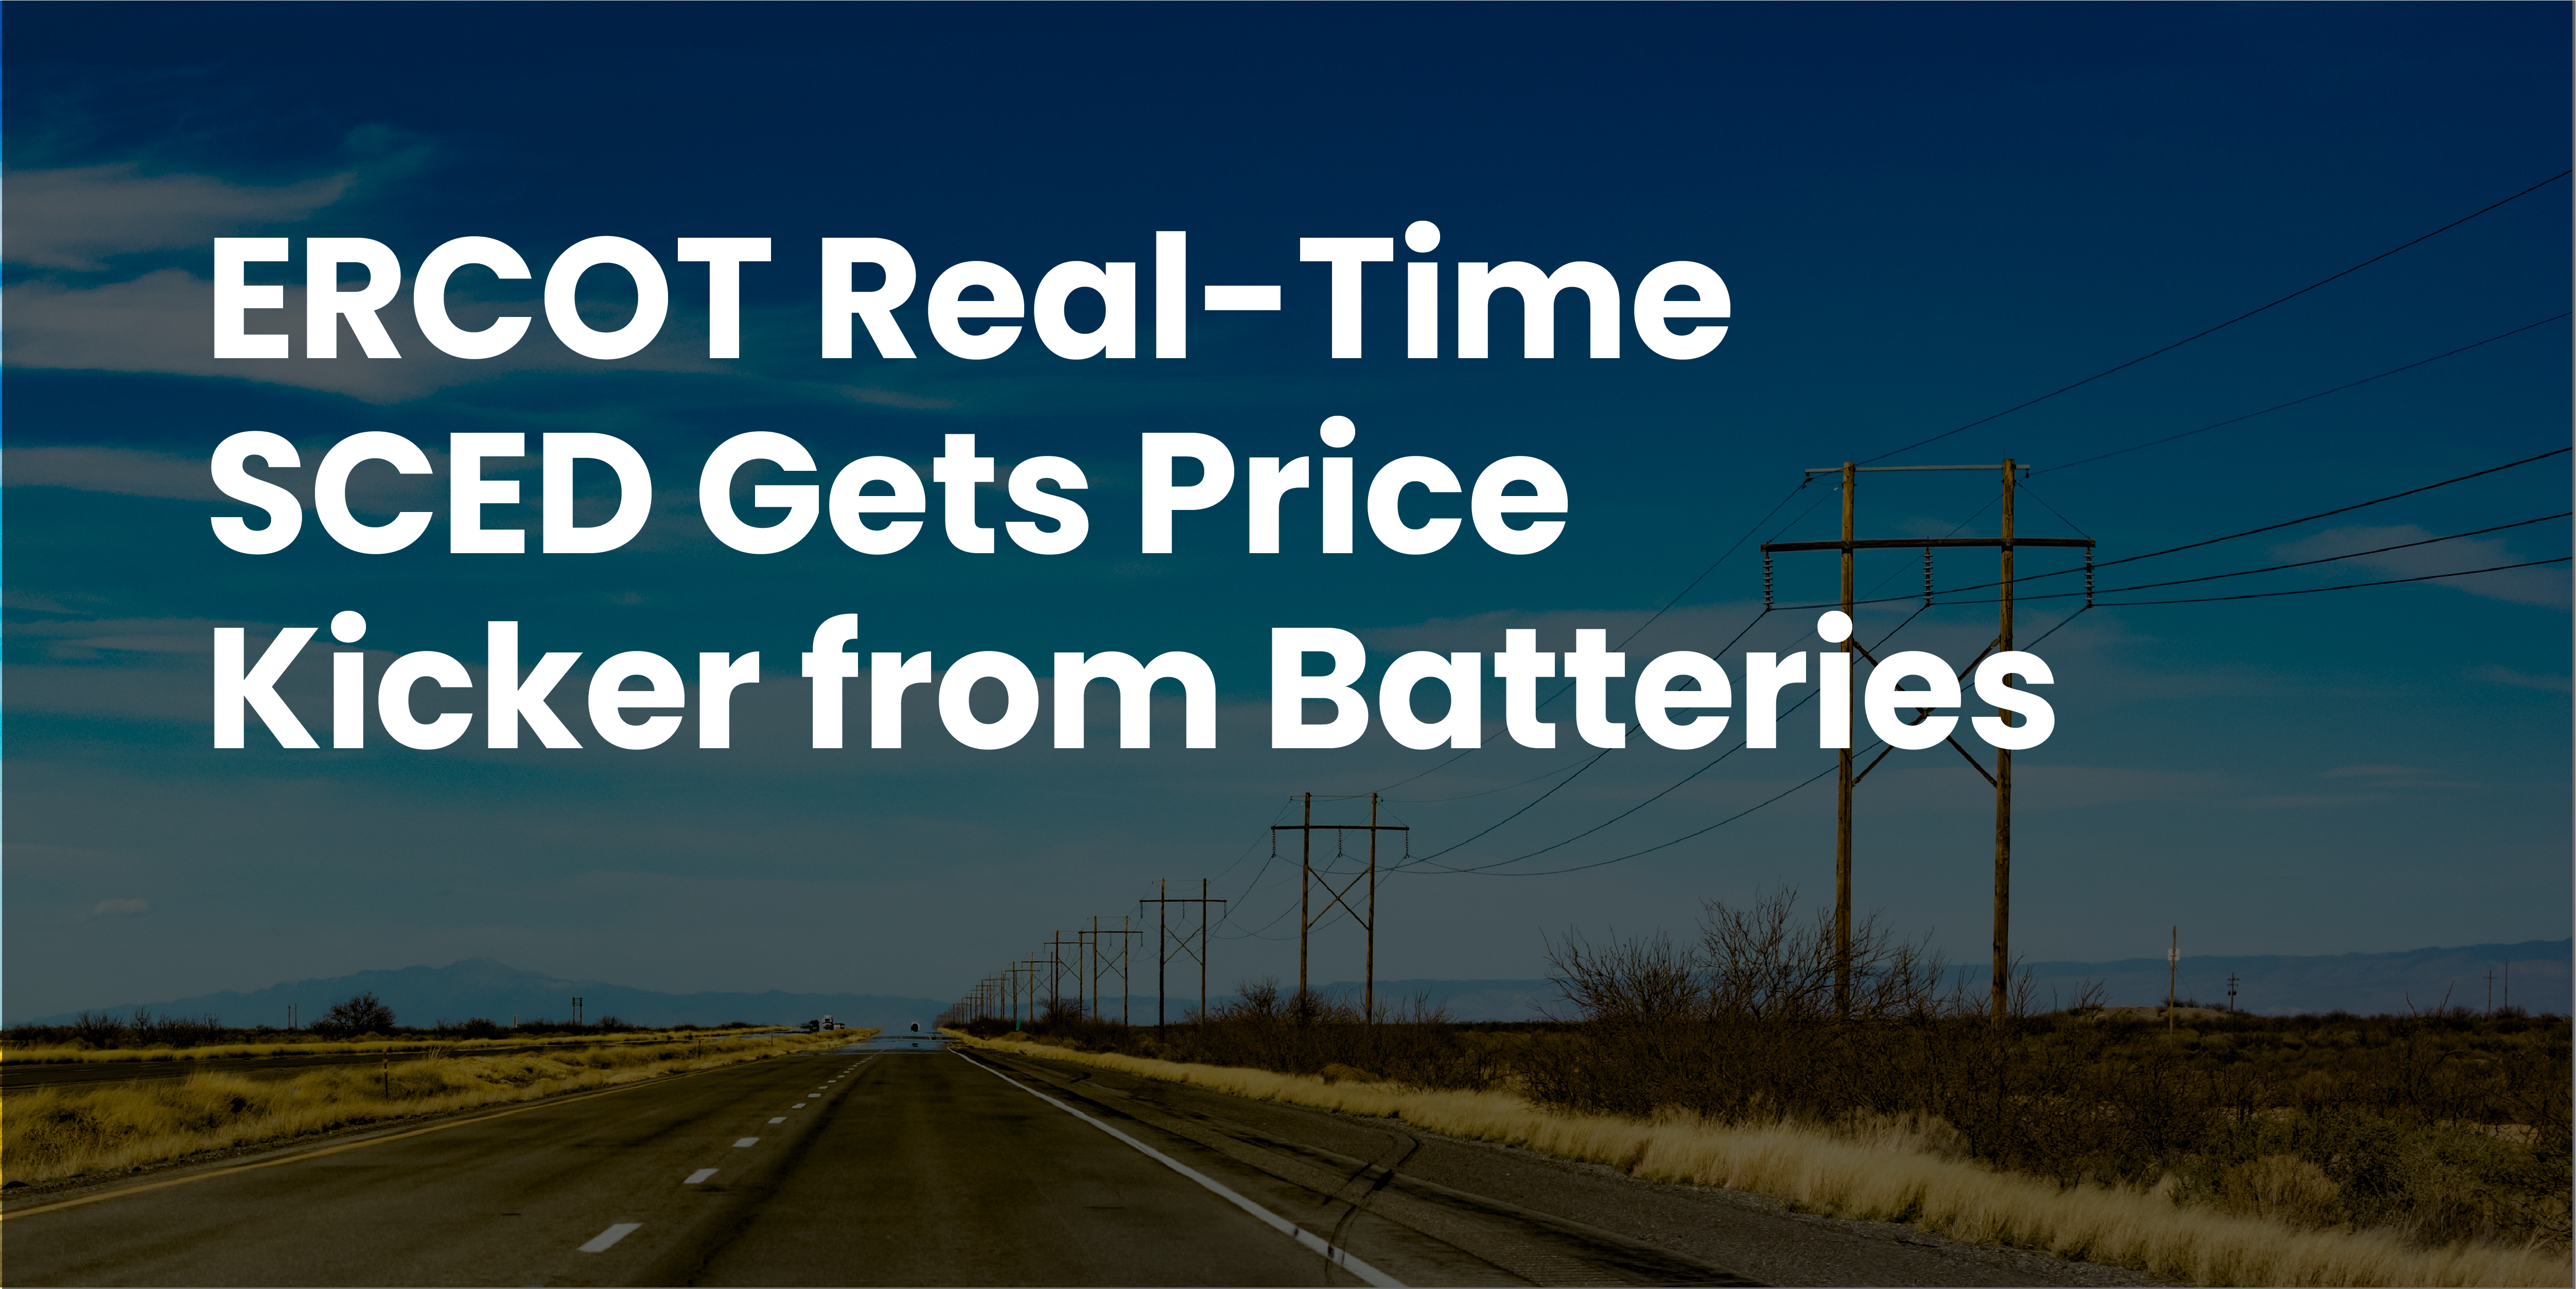 ERCOT Real-Time SCED Gets Price Kicker from Batteries